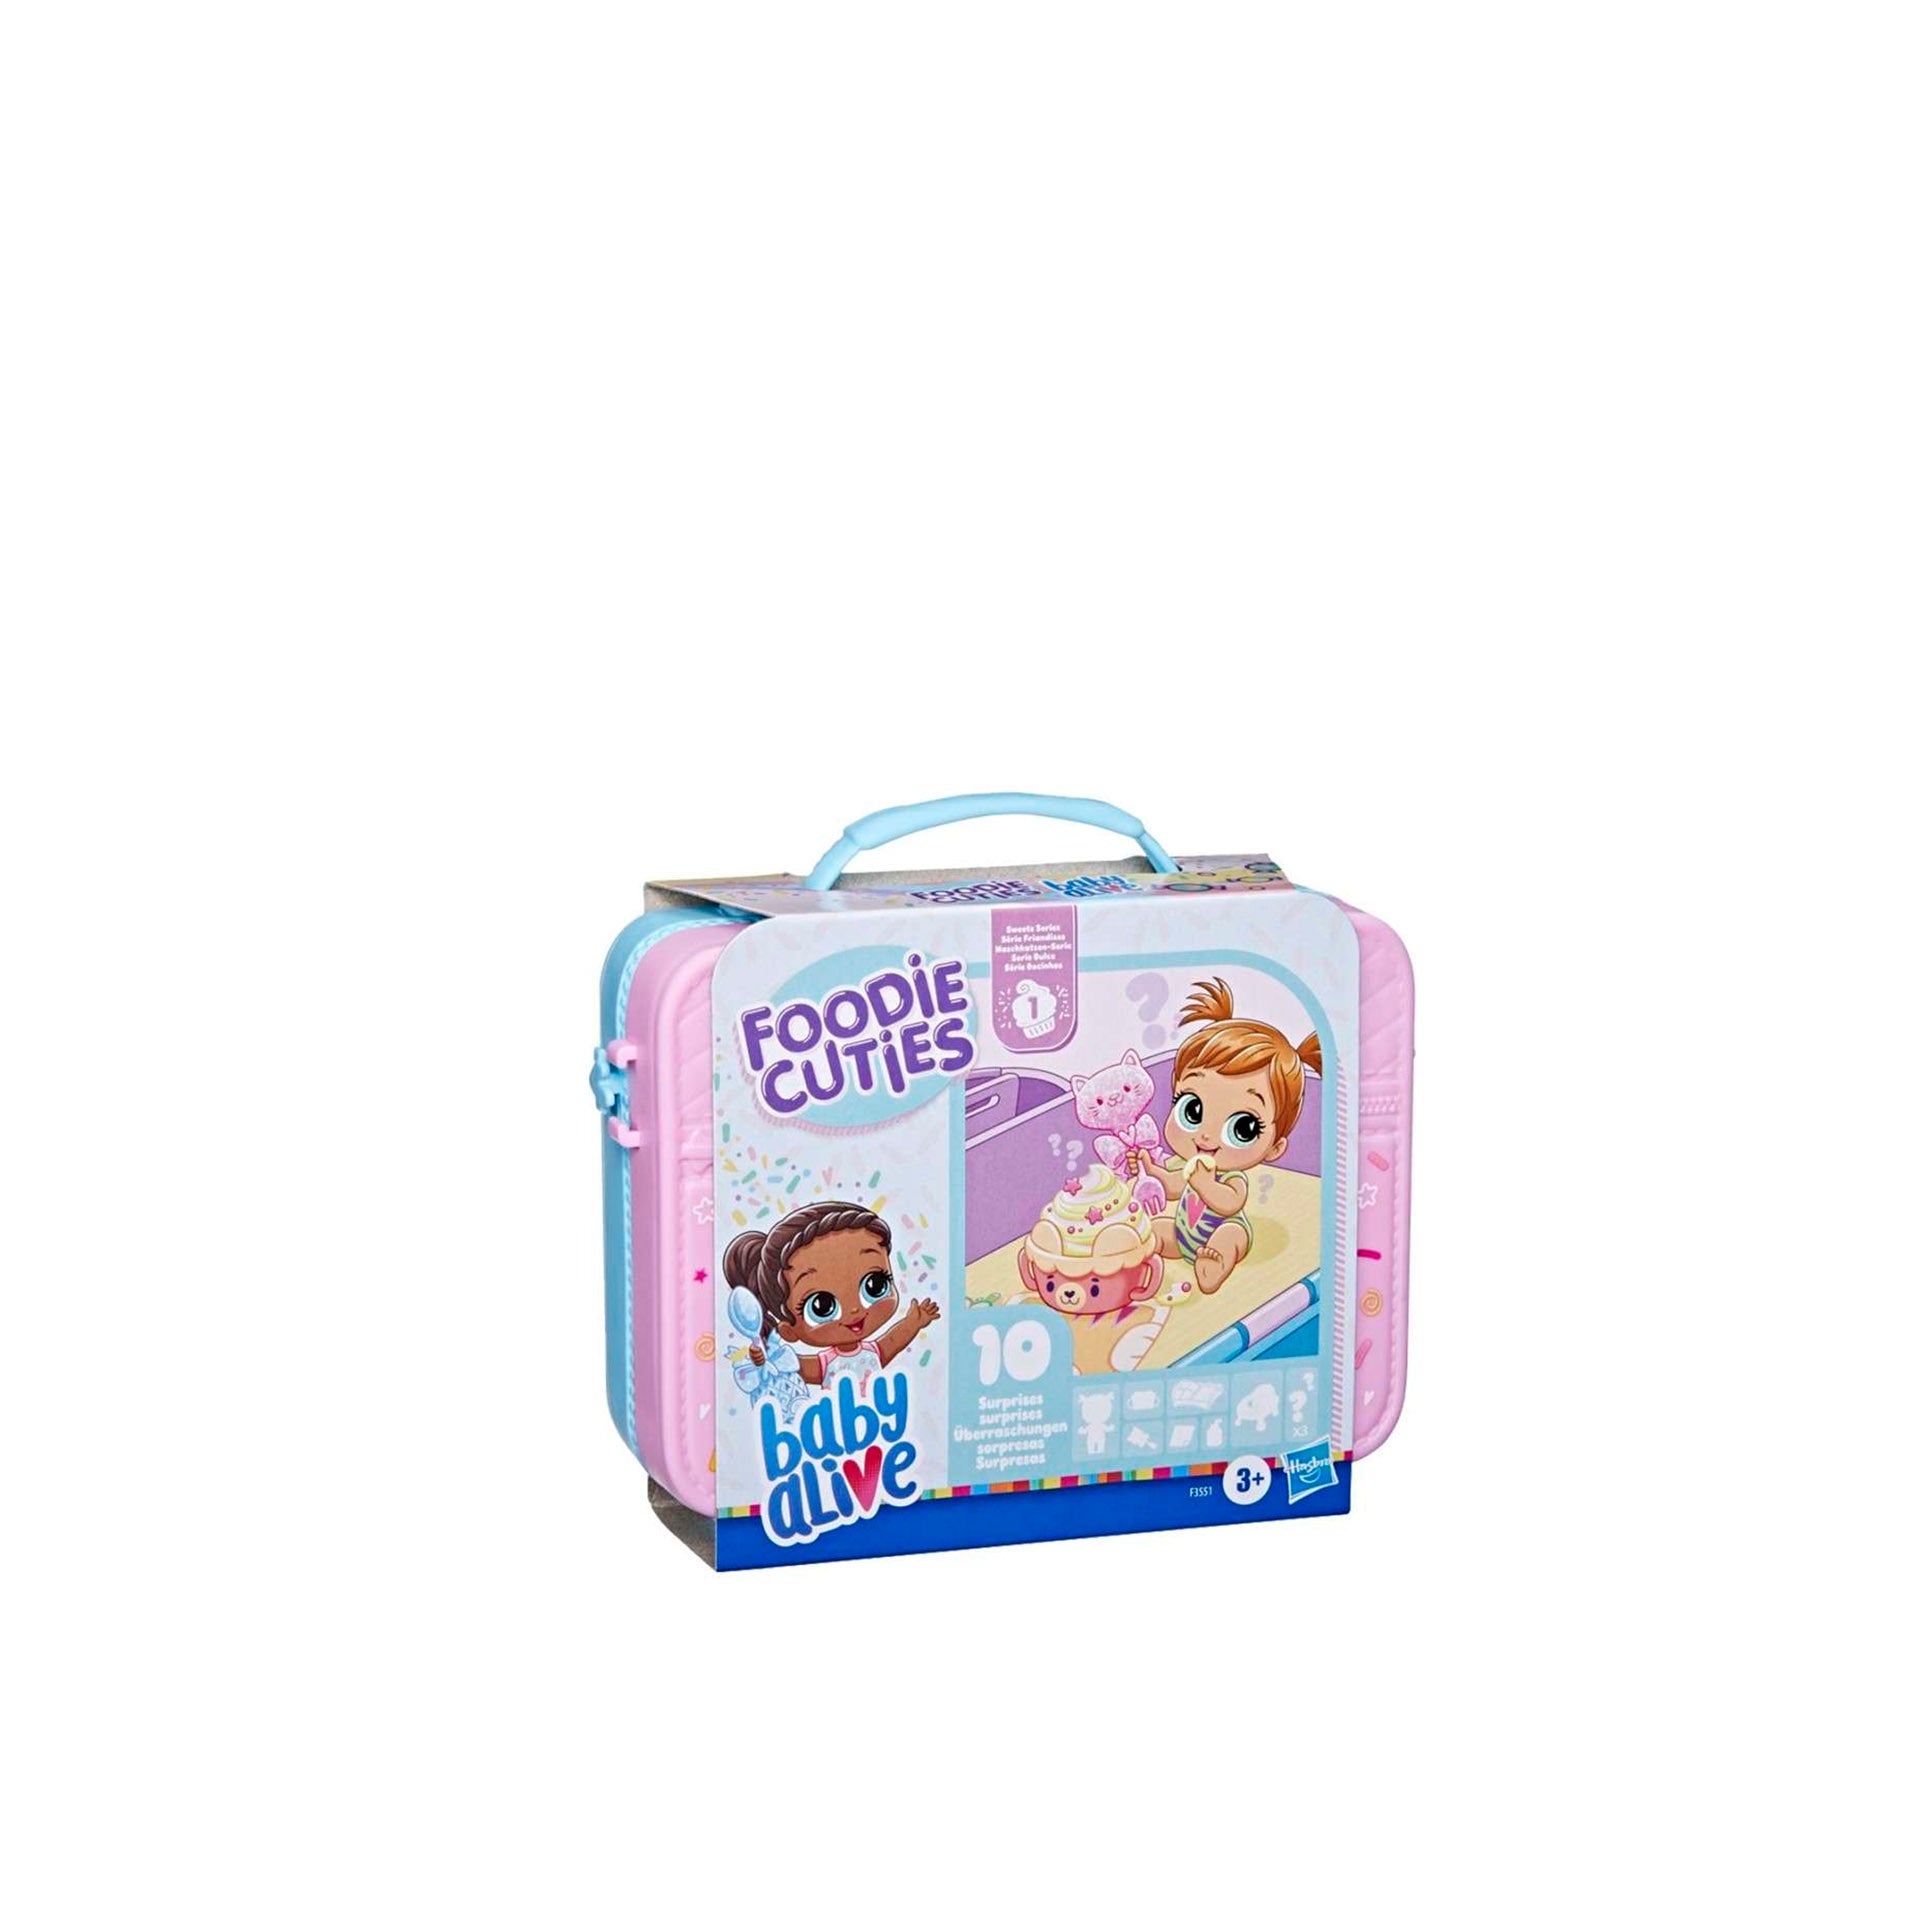 Baby Alive Foodie Cuties Lunch Box